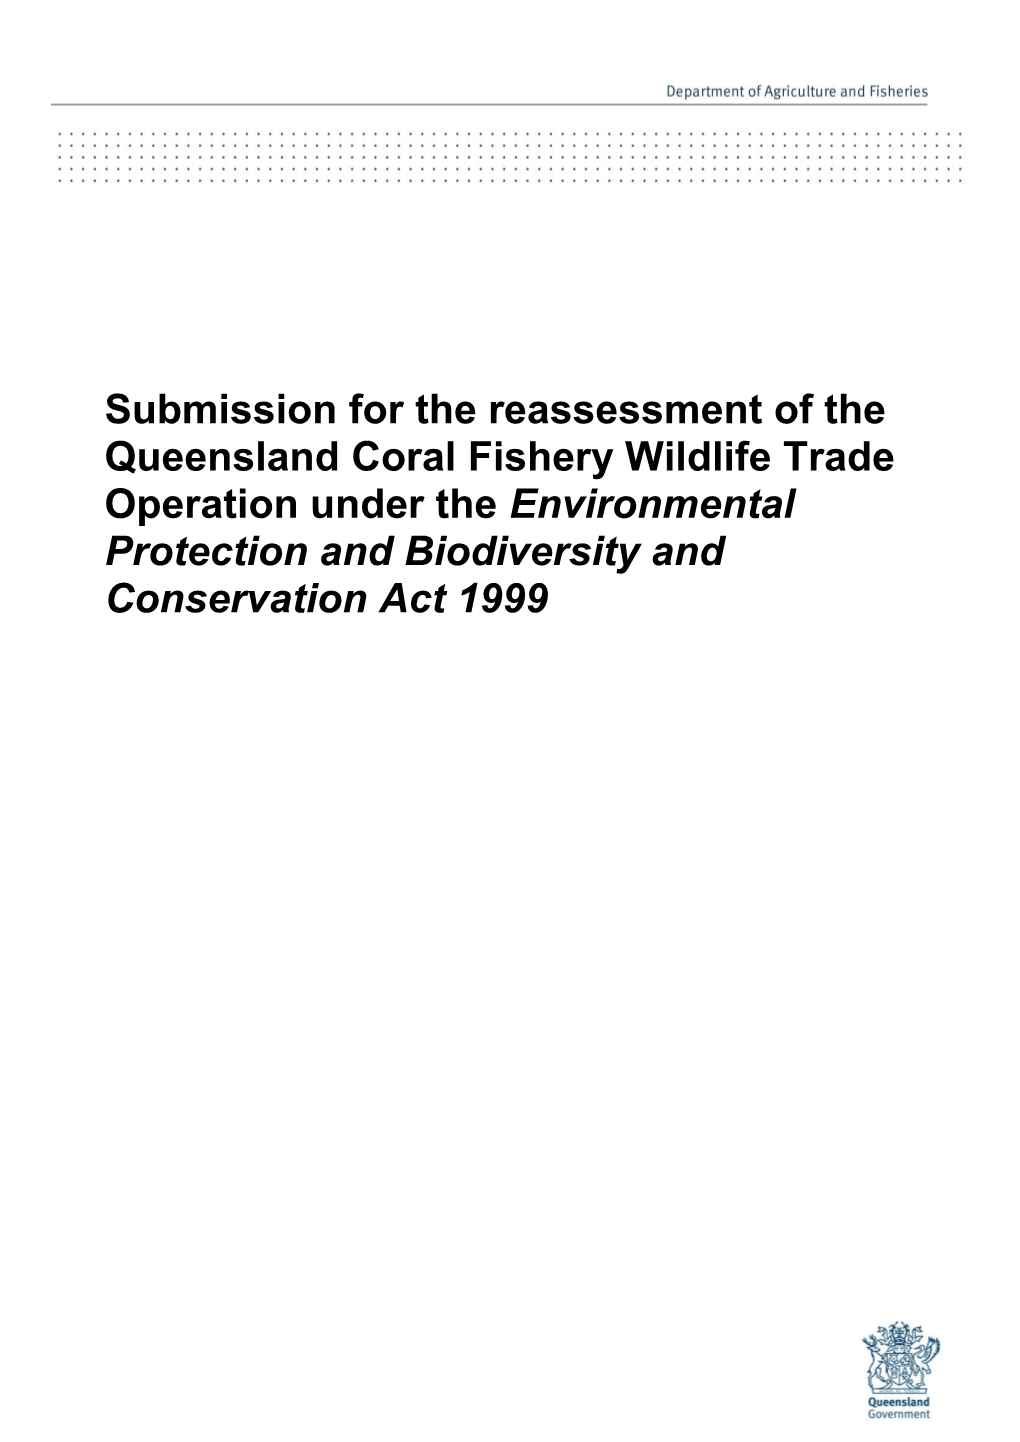 Application for Reassessment of the Queensland Coral Fishery